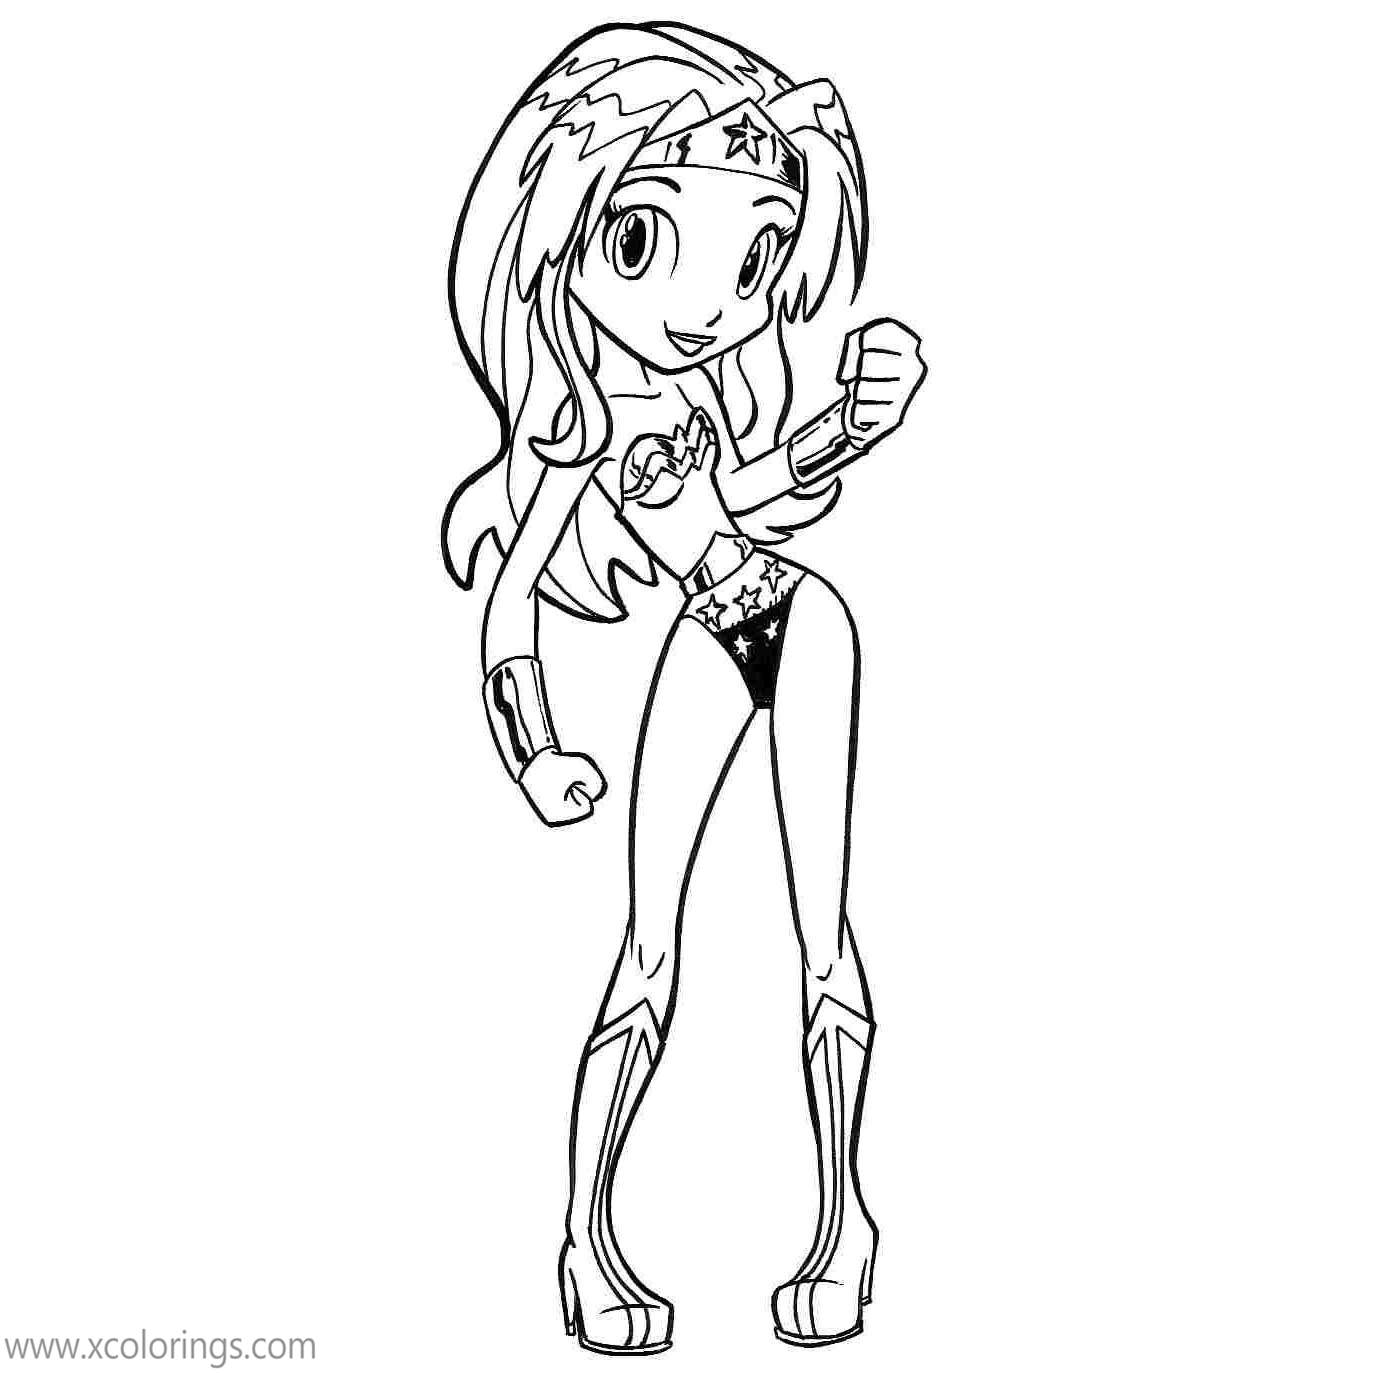 Free Animated Cute Wonder Woman Coloring Pages printable